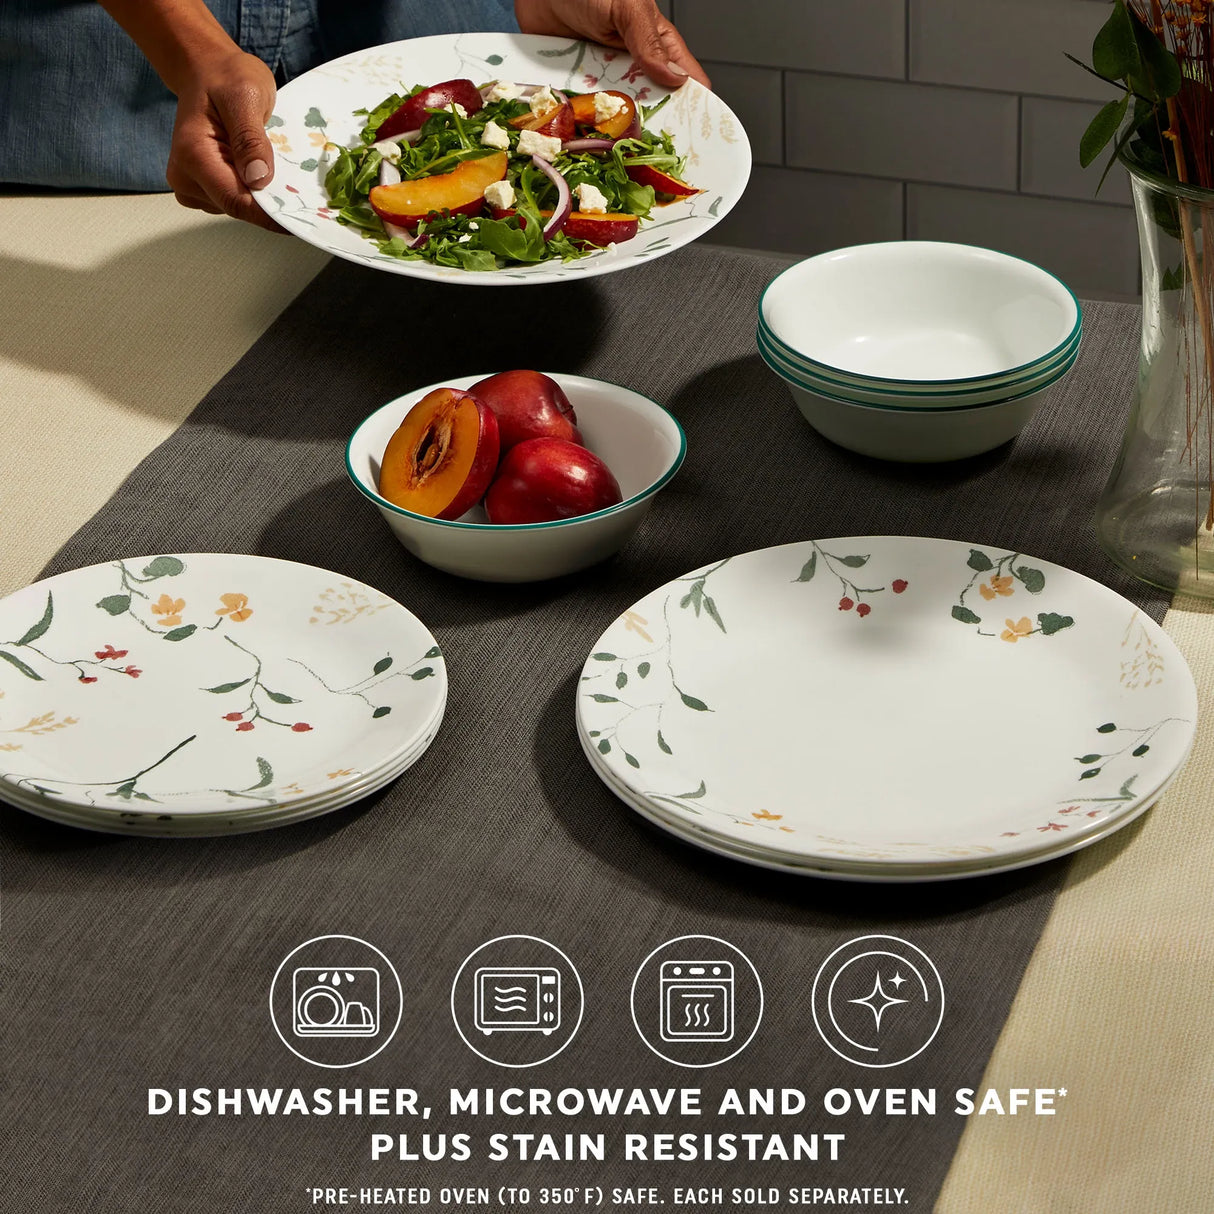  Wildflower Scatter dinnerware with text dishwasher, microwave &amp; ovensafe